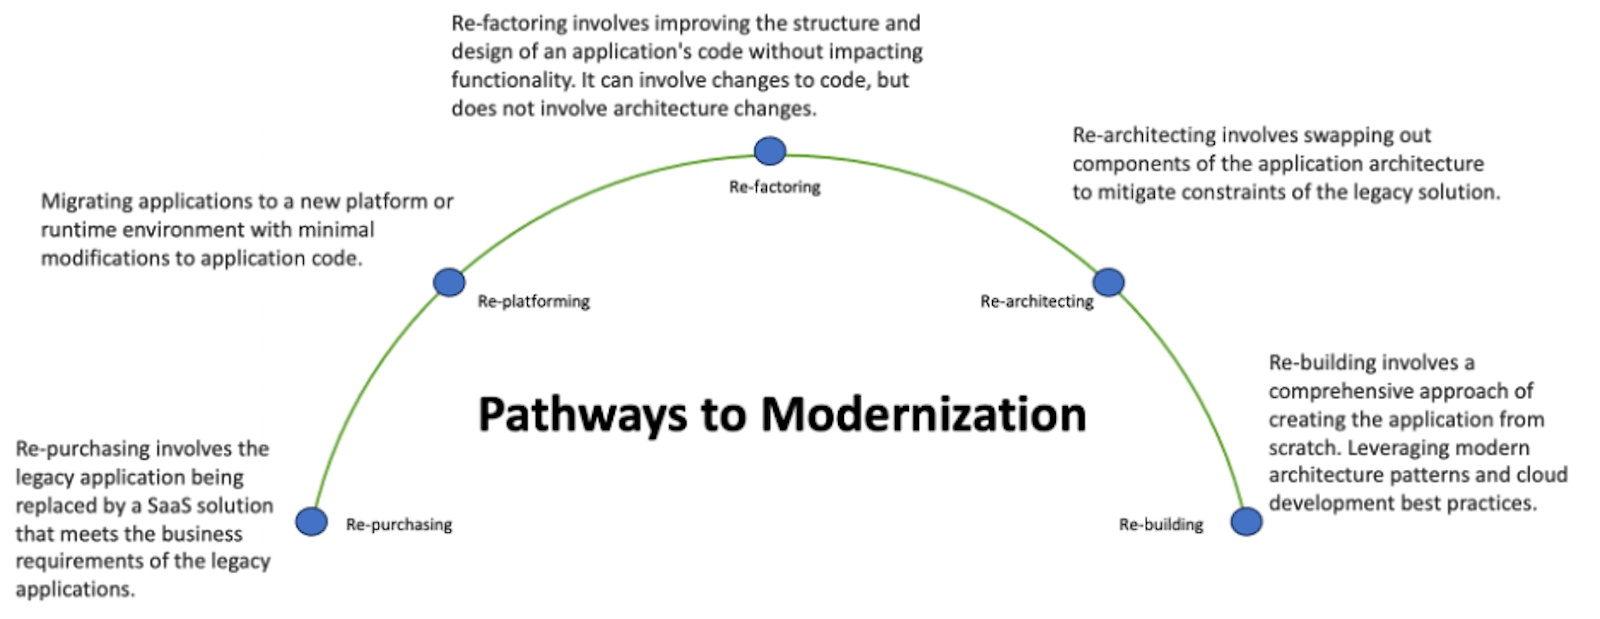 5 Ways to Make the Most of Your Cloud Investment: A Guide to Modernization